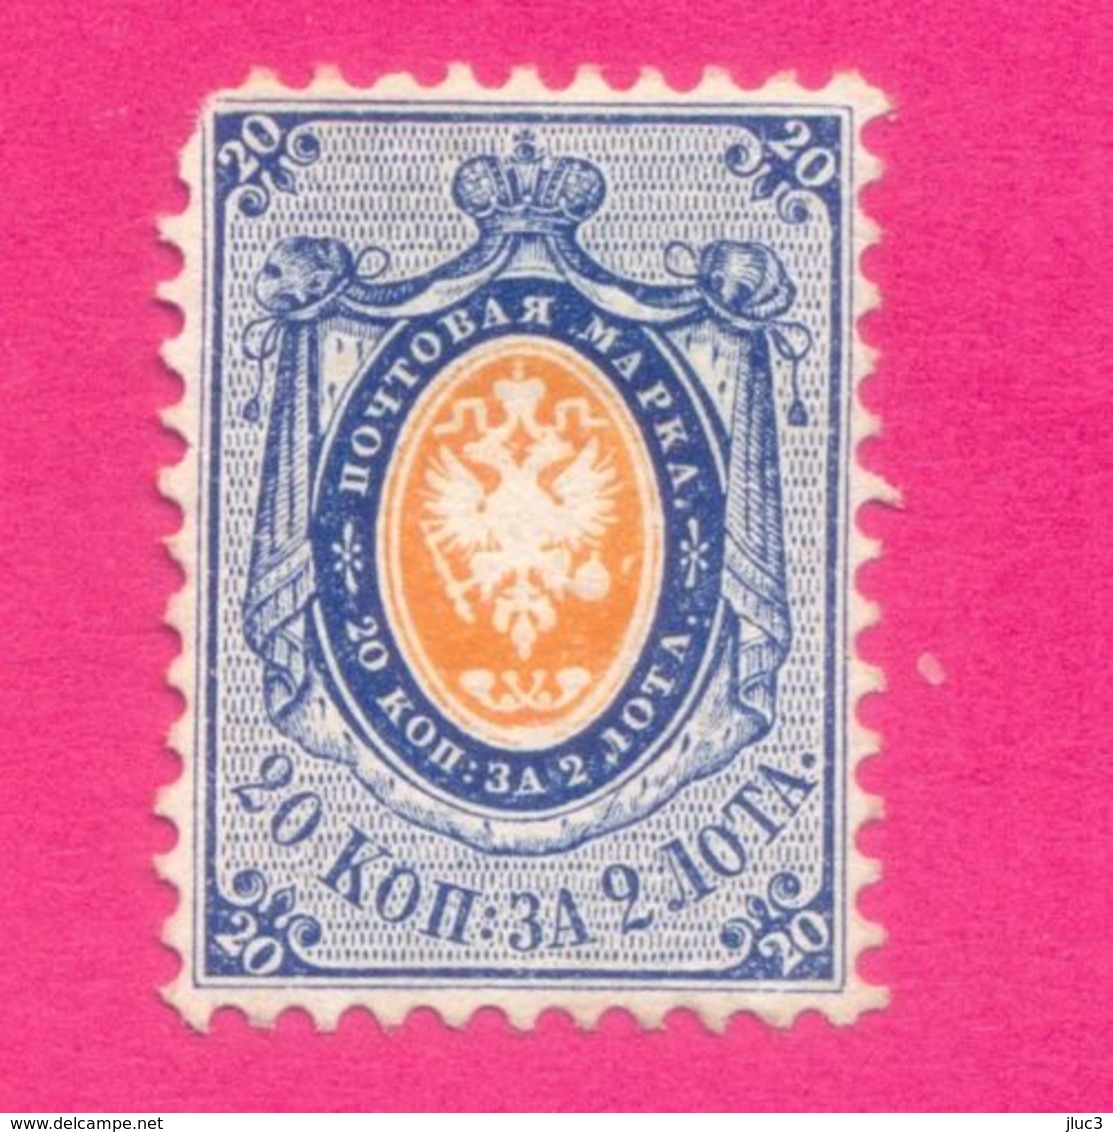 N6 - RARE - RUSSIE 1858 - Le  Spectaculaire  TIMBRE  N° 6 (YT)  Neuf**  --  Armoiries  : Aigle En Relief - Côte > 1100 $ - Unused Stamps